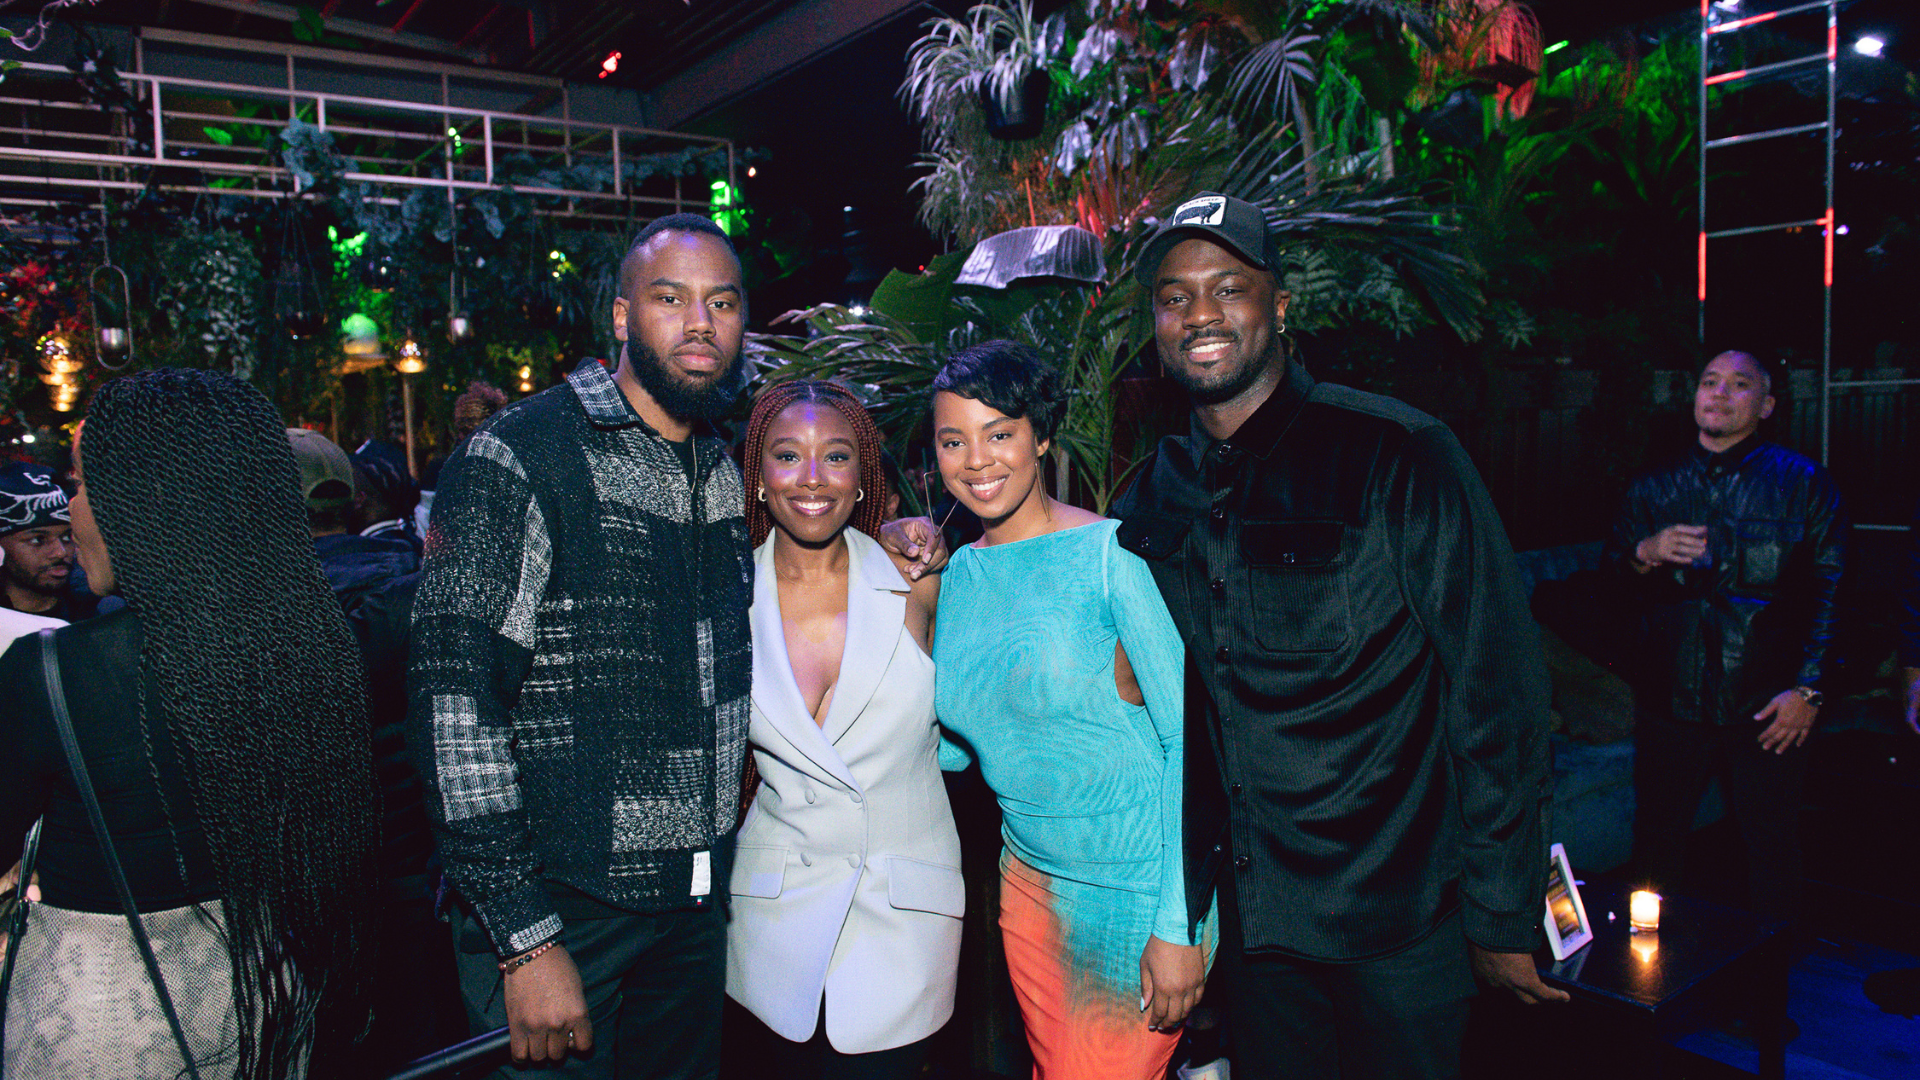 These Co-Founders Self-Funded An Event Platform To Help Black Professionals Network For Free